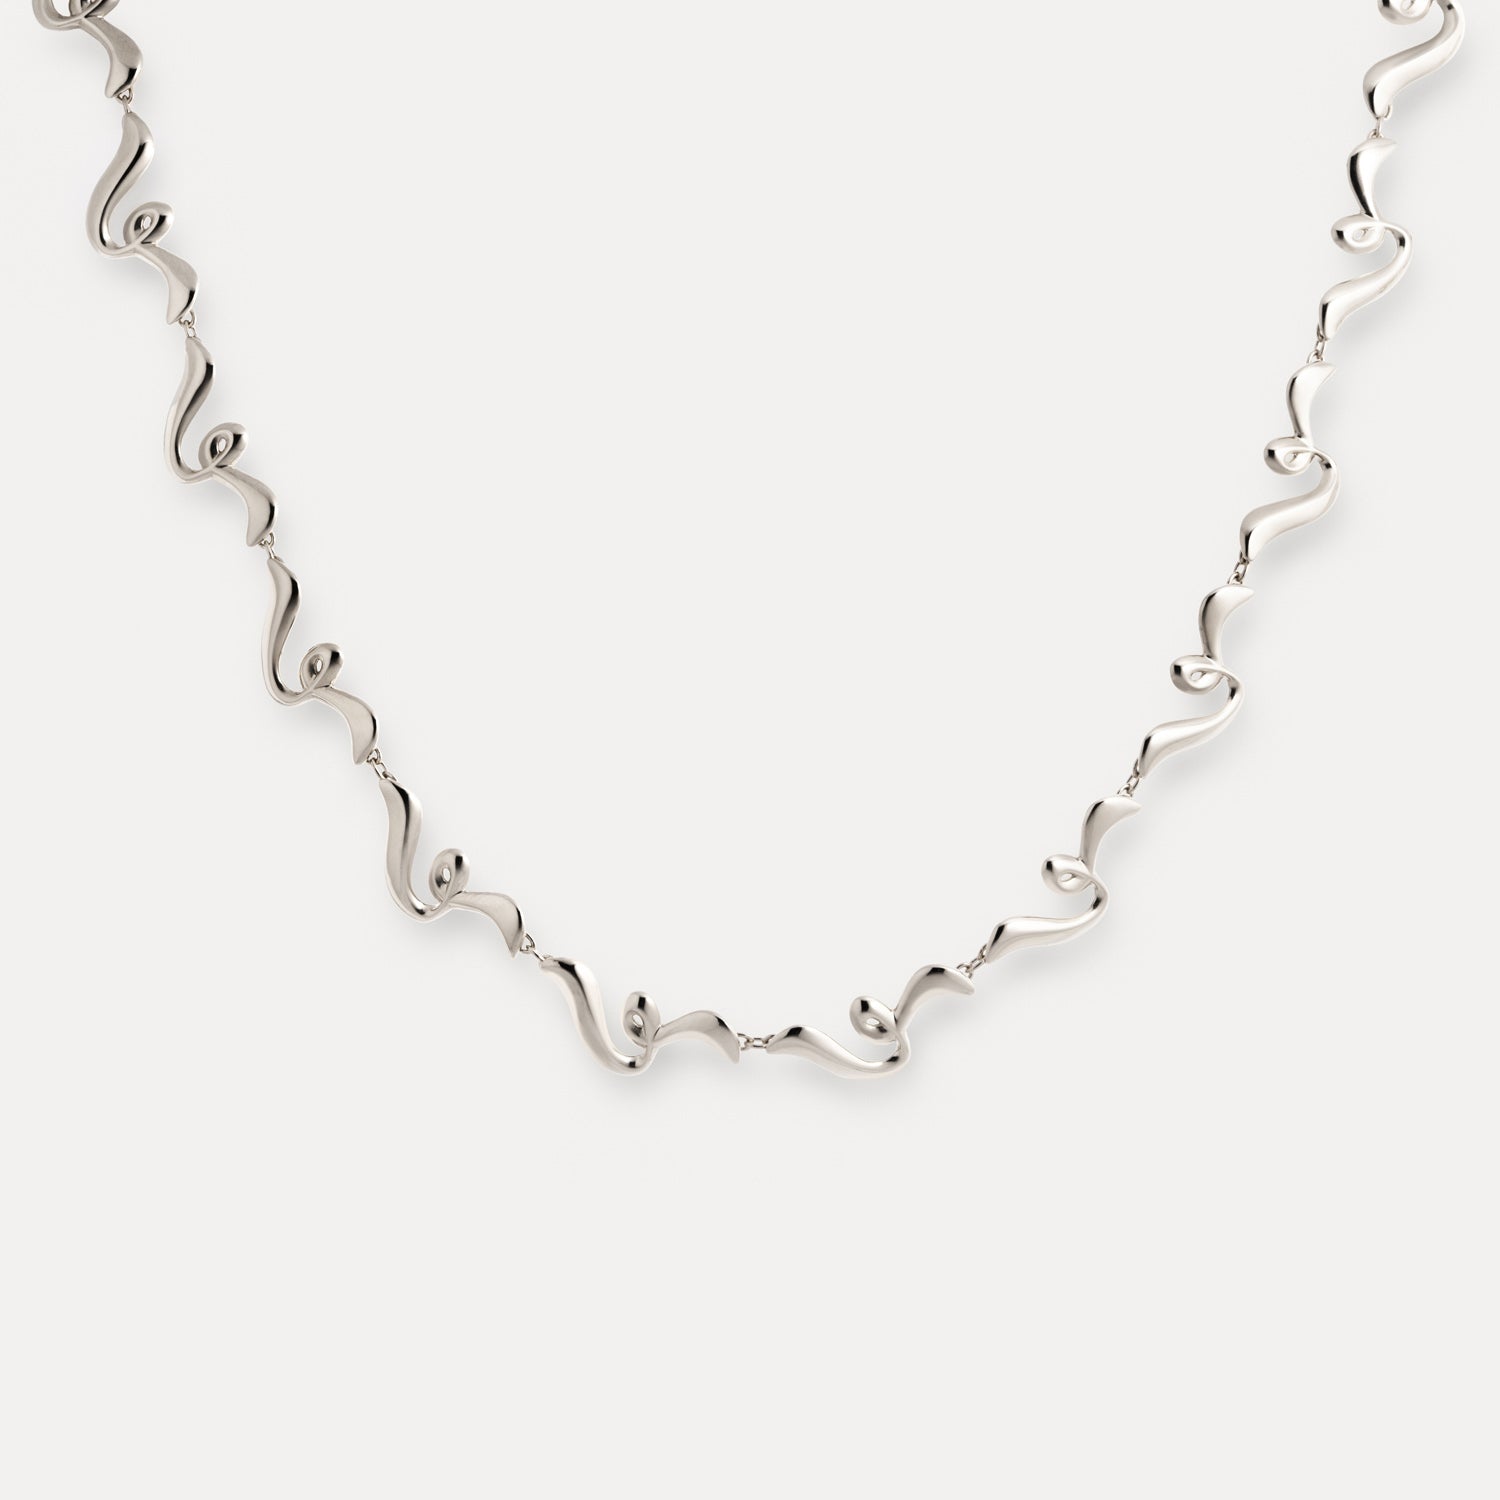 Poise Twirl Choker Necklace, recycled Sterling Silver - VEYIA Berlin